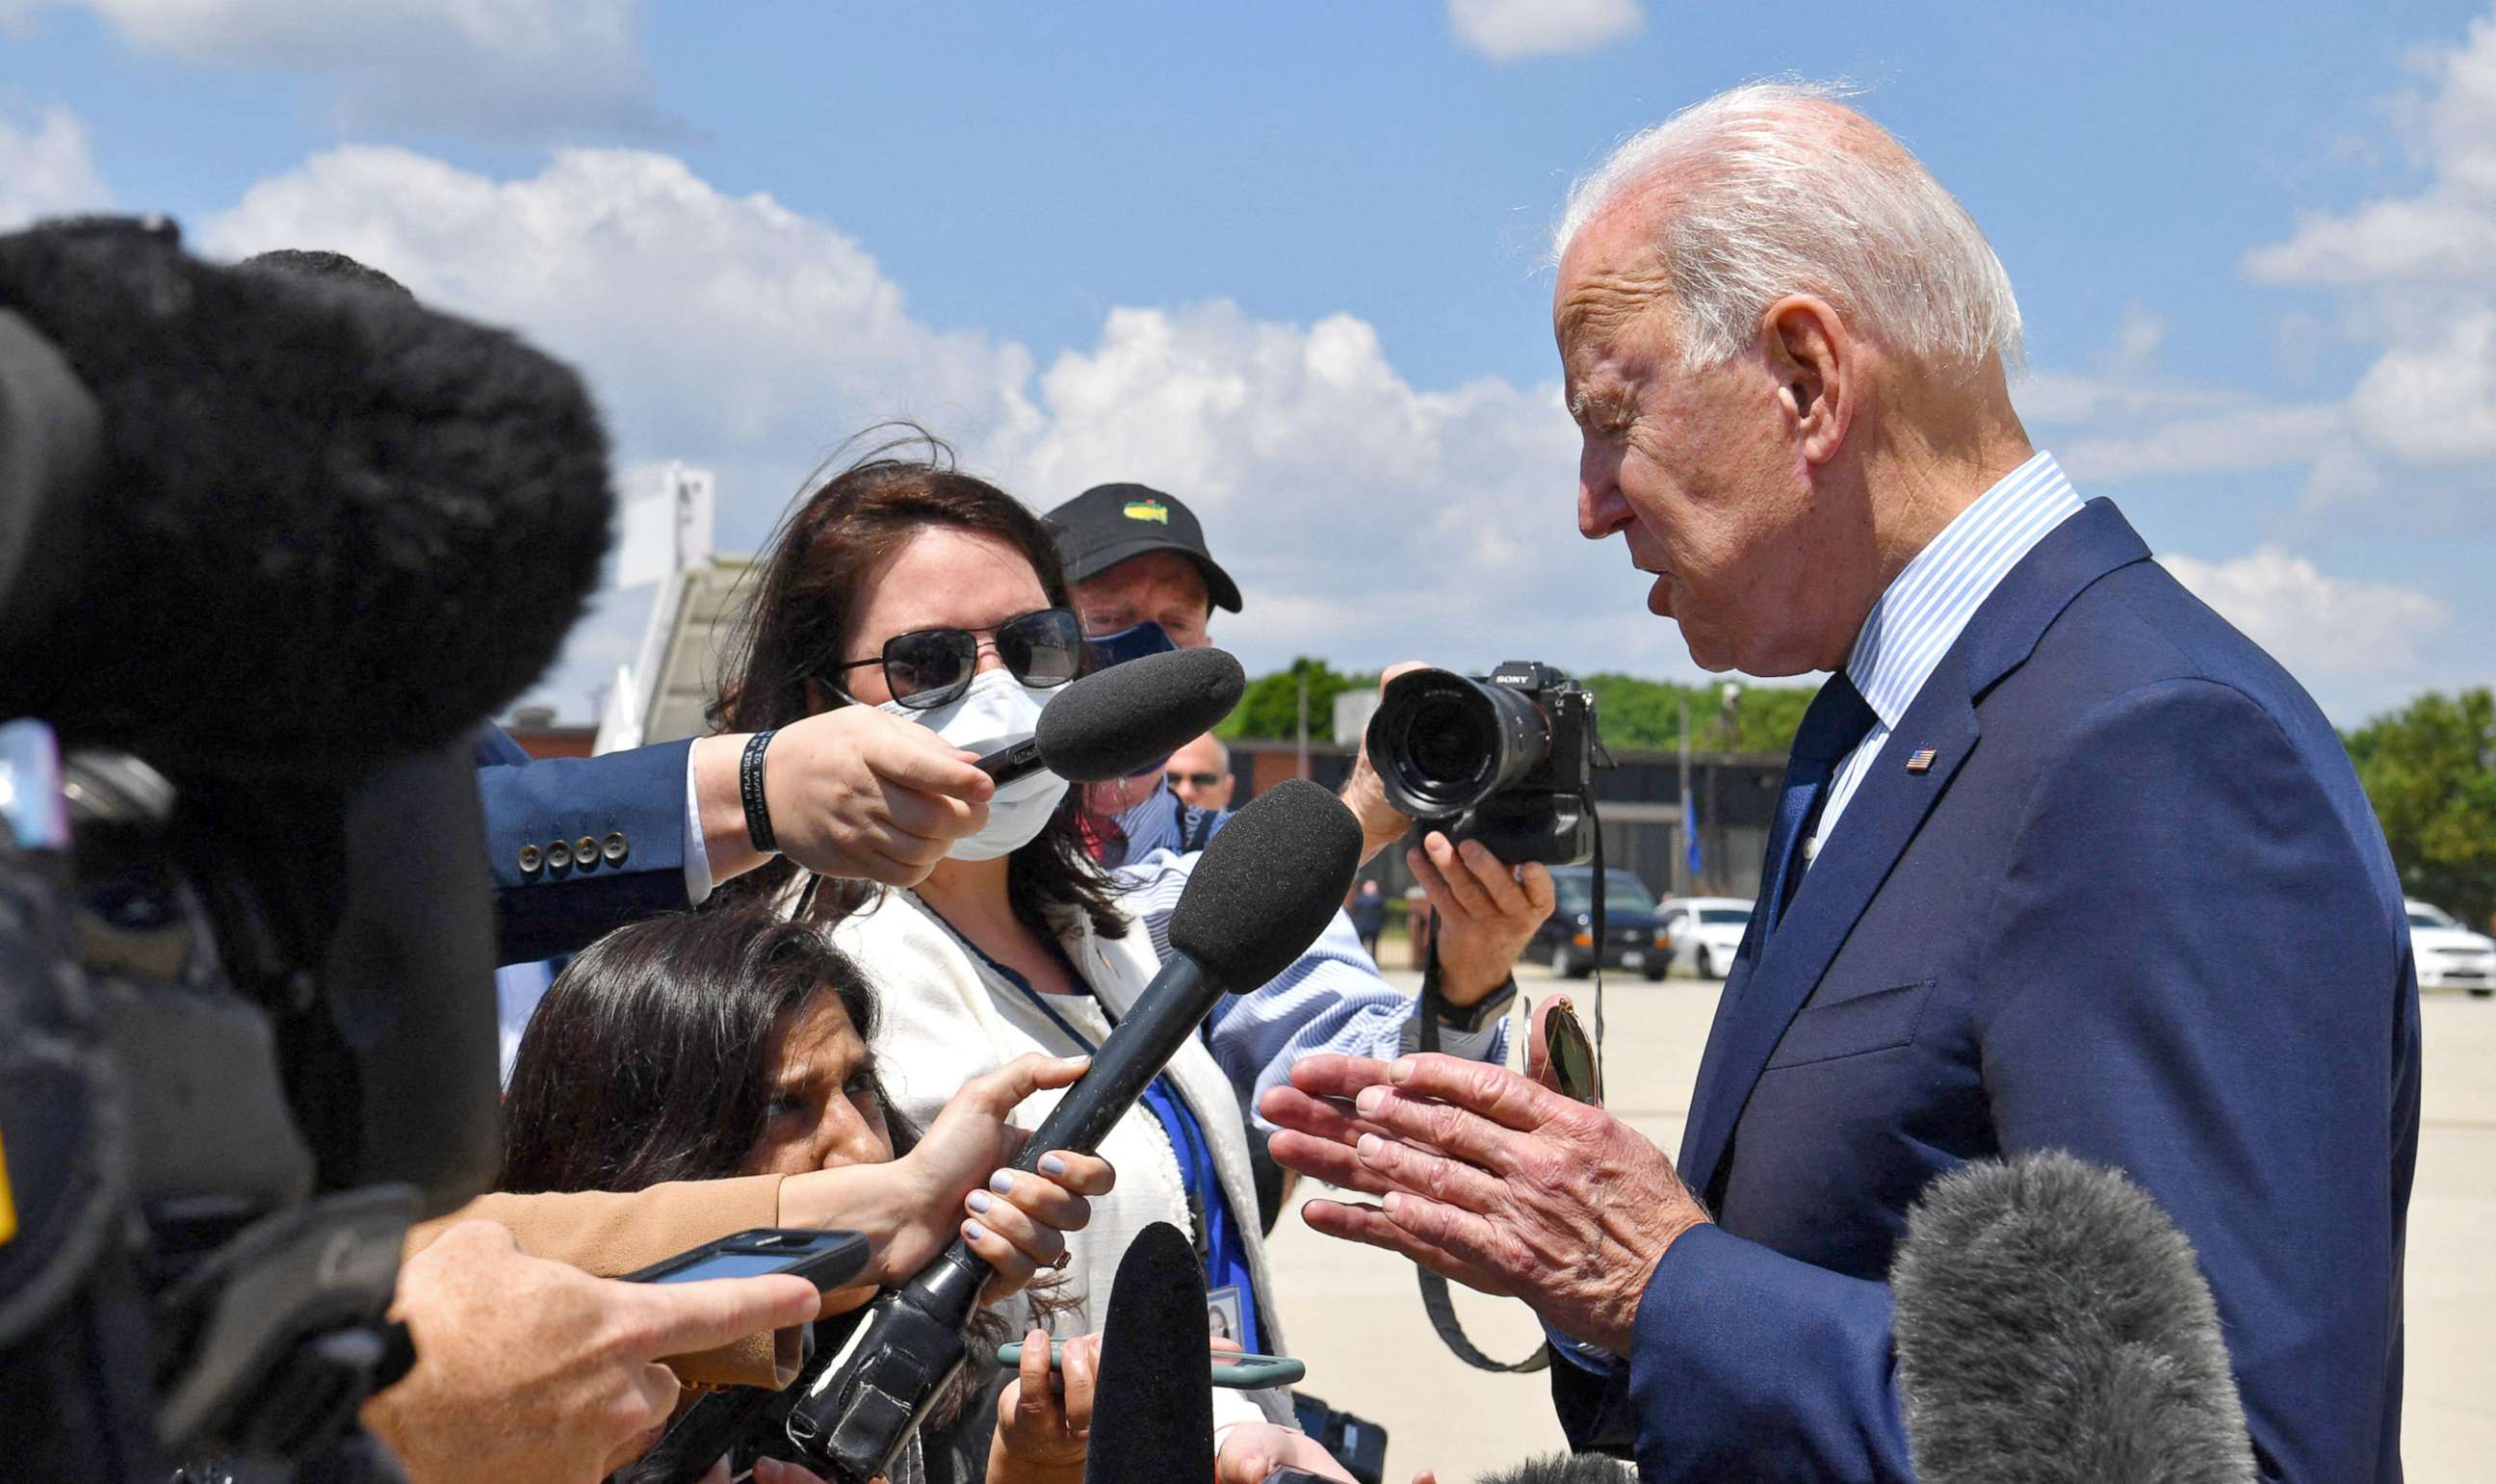 PHOTO: President Joe Biden speaks to the press before boarding Airforce One at Joint Base Andrews, Md., May 27, 2021, before departing for Ohio to deliver remarks on the economy.